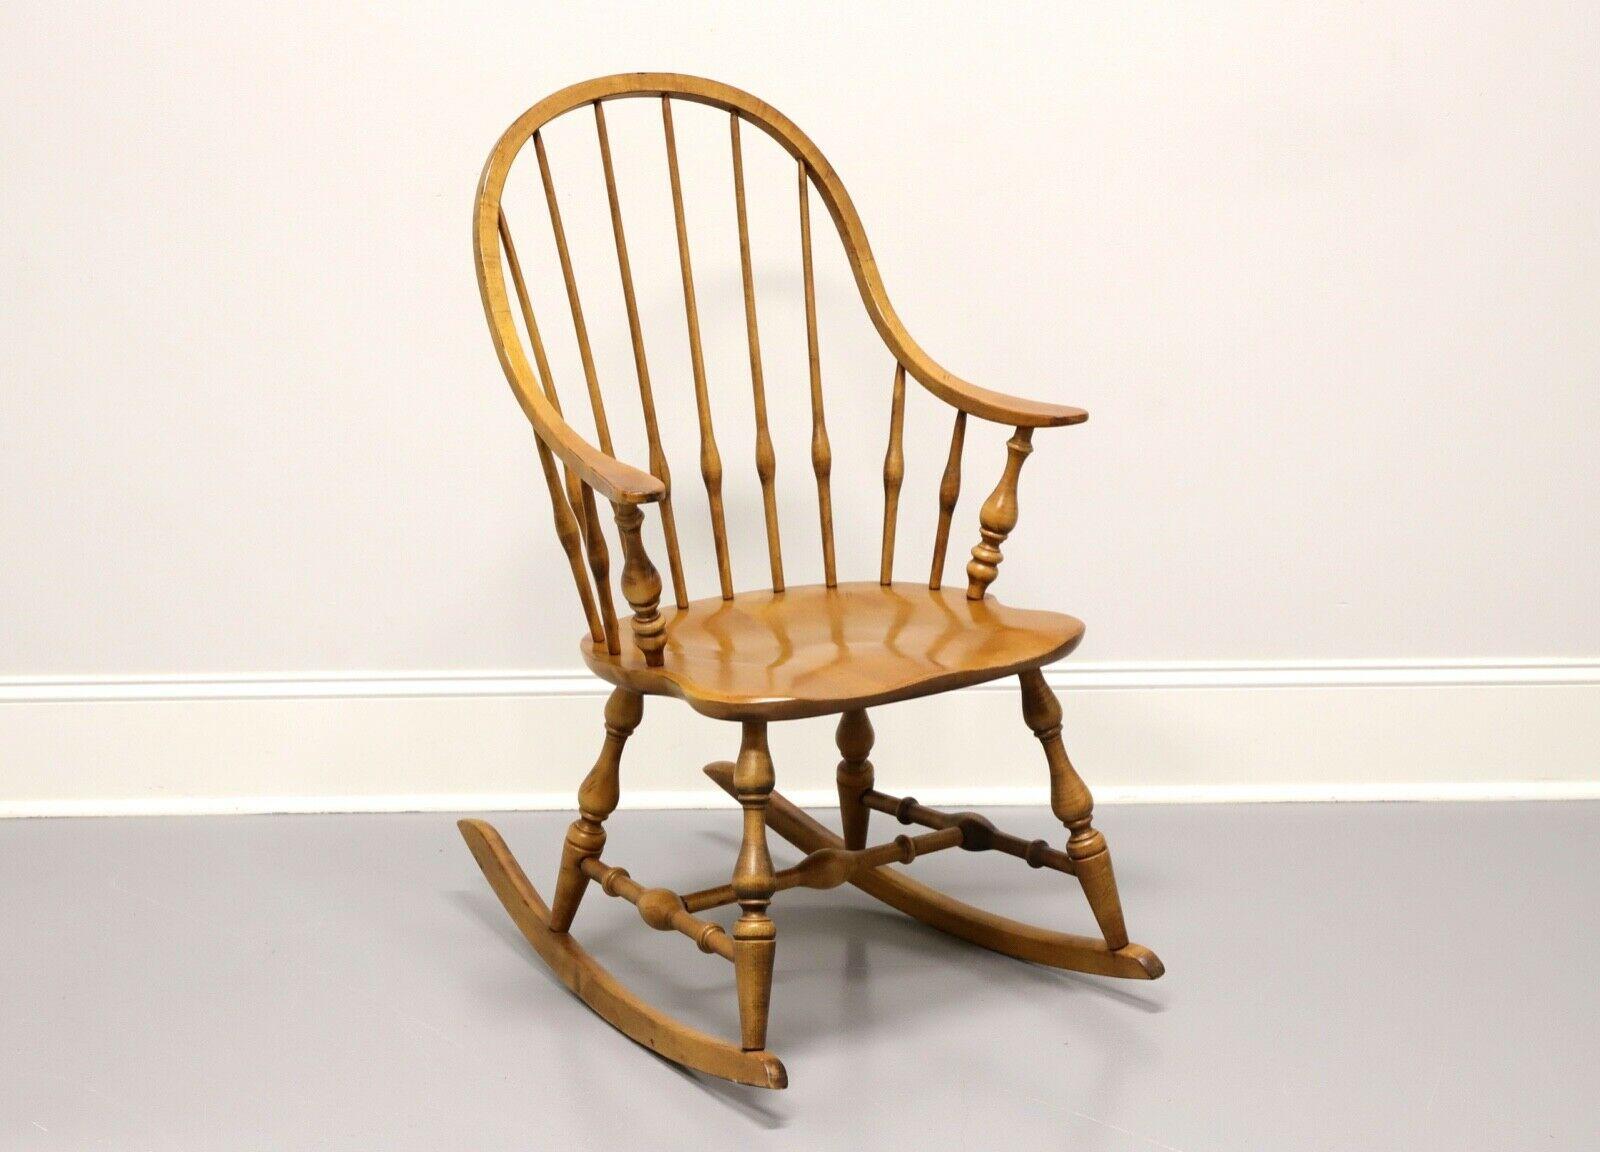 ETHAN ALLEN Circa 1776 Solid Maple Windsor Style Rocking Chair 1